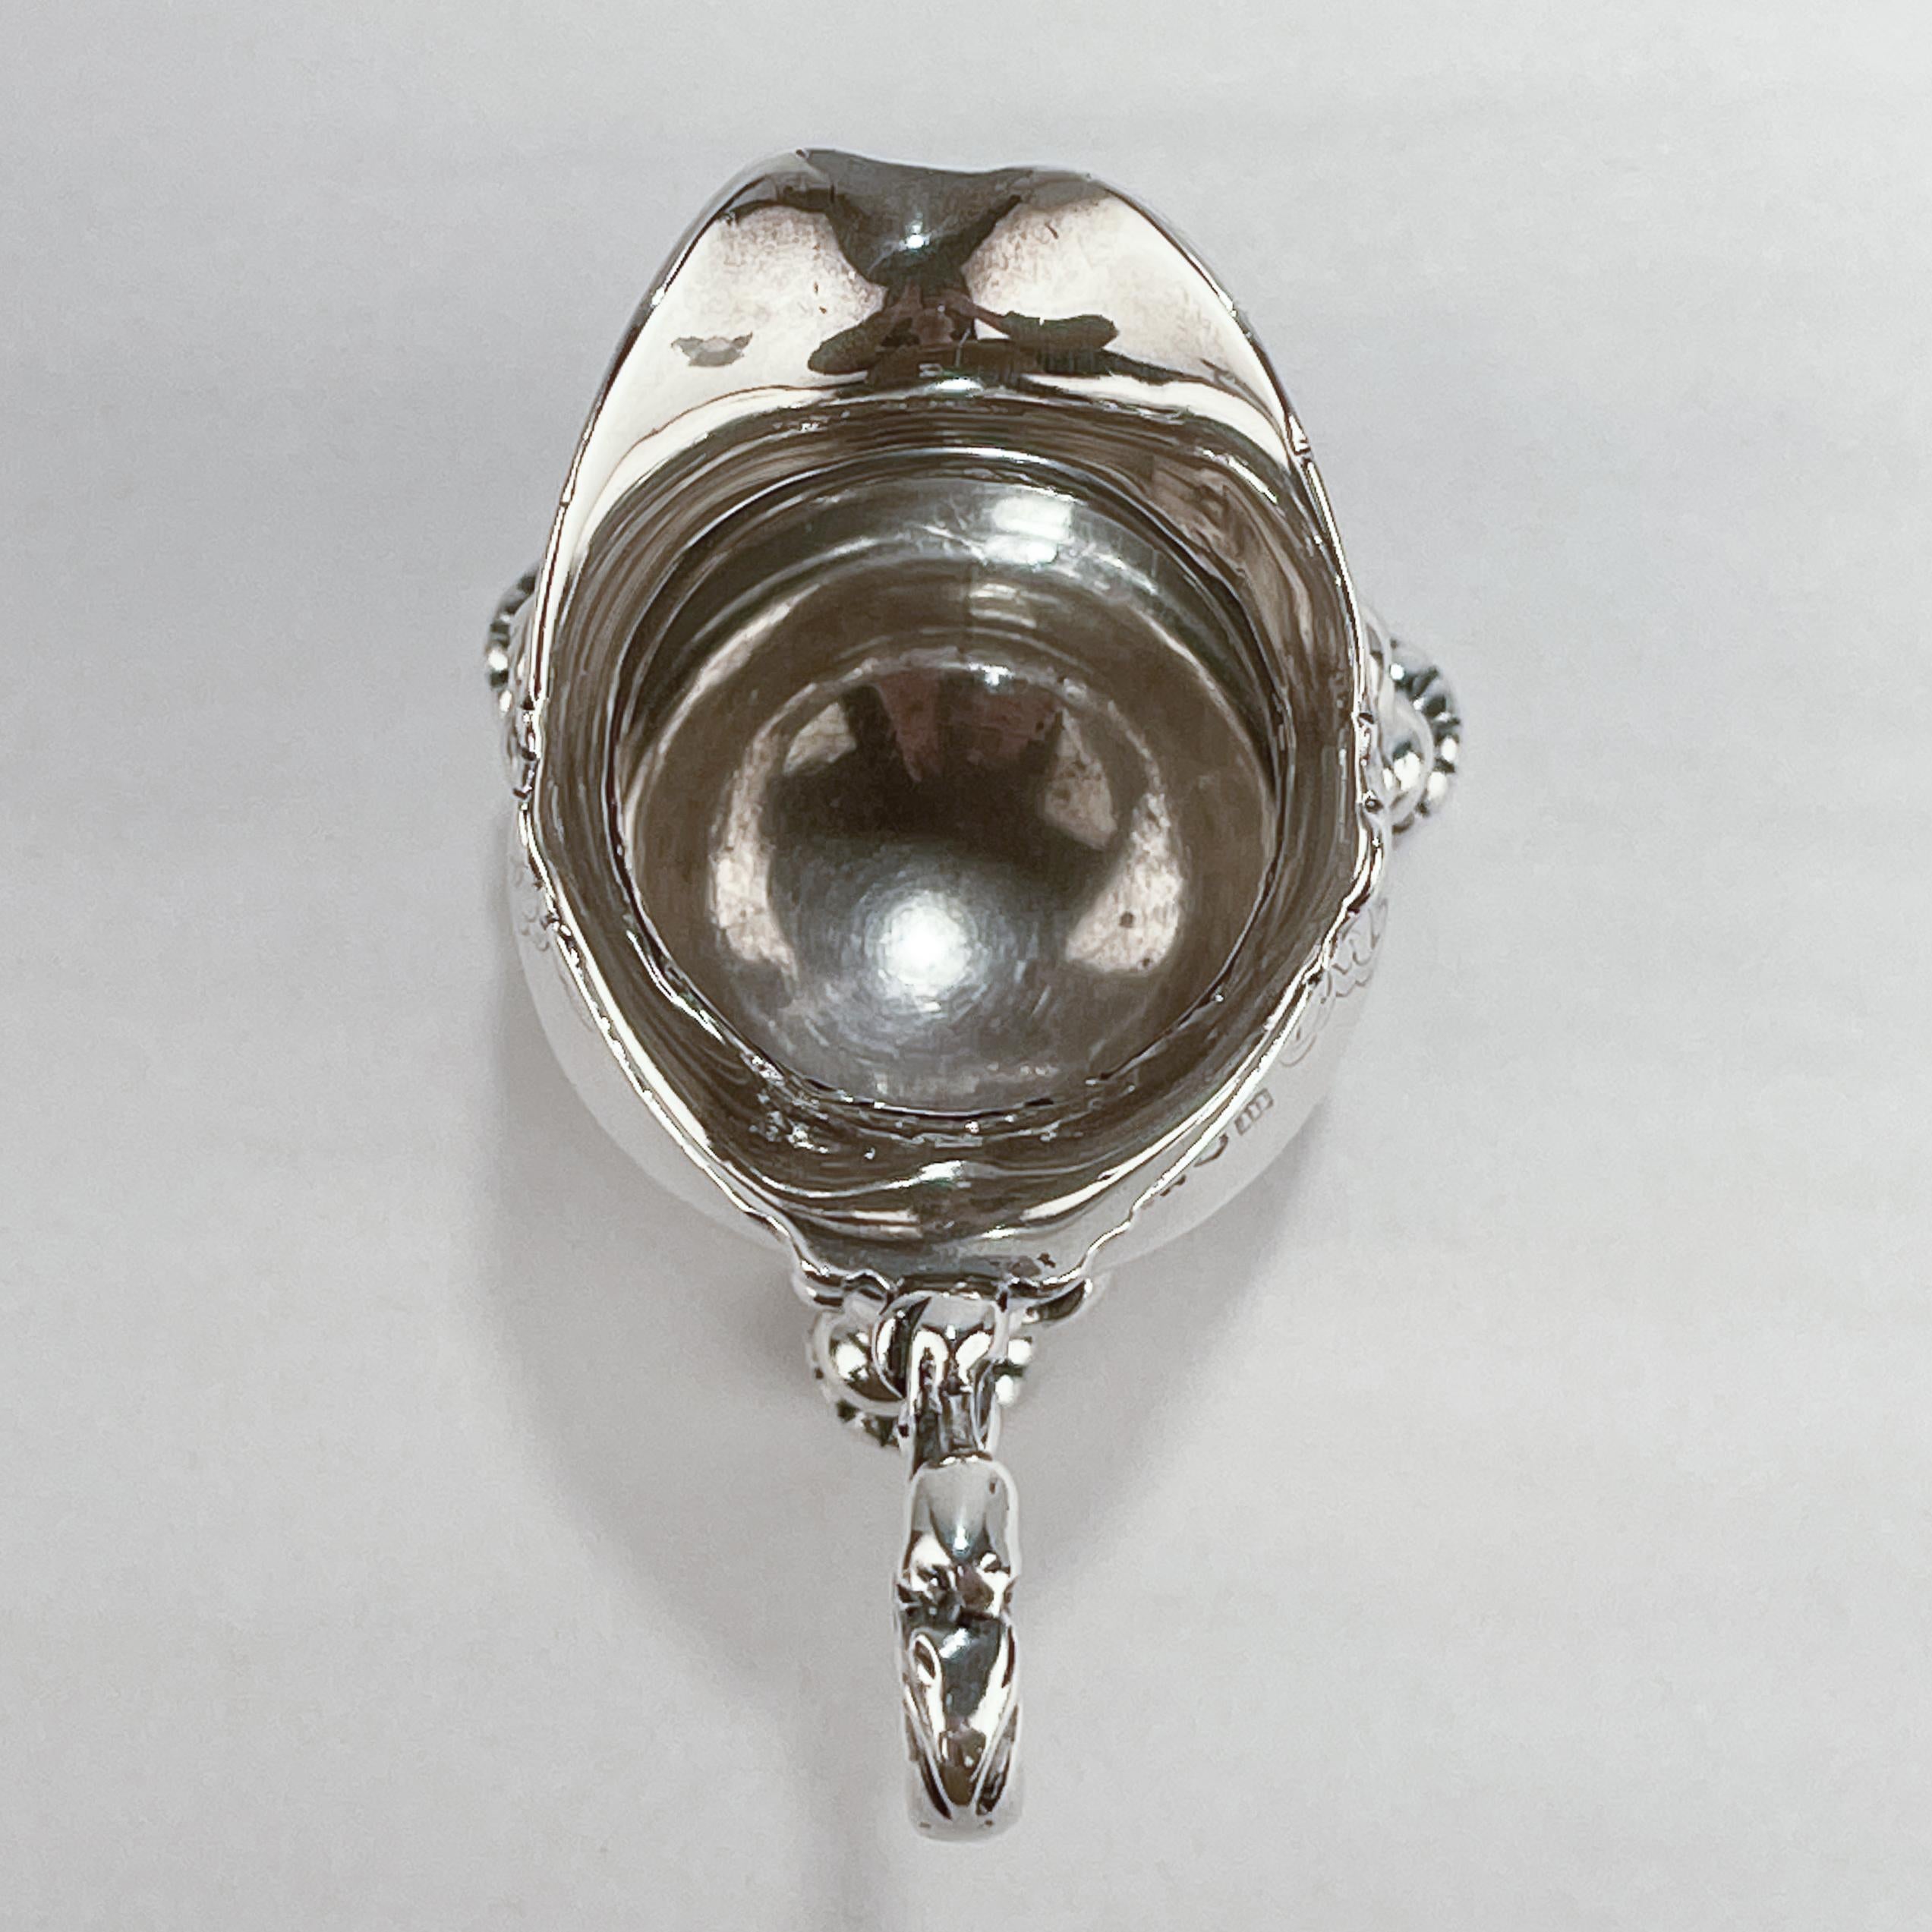 Carrington & Co. Rococo or George II Style Sterling Silver Cream Pitcher For Sale 3